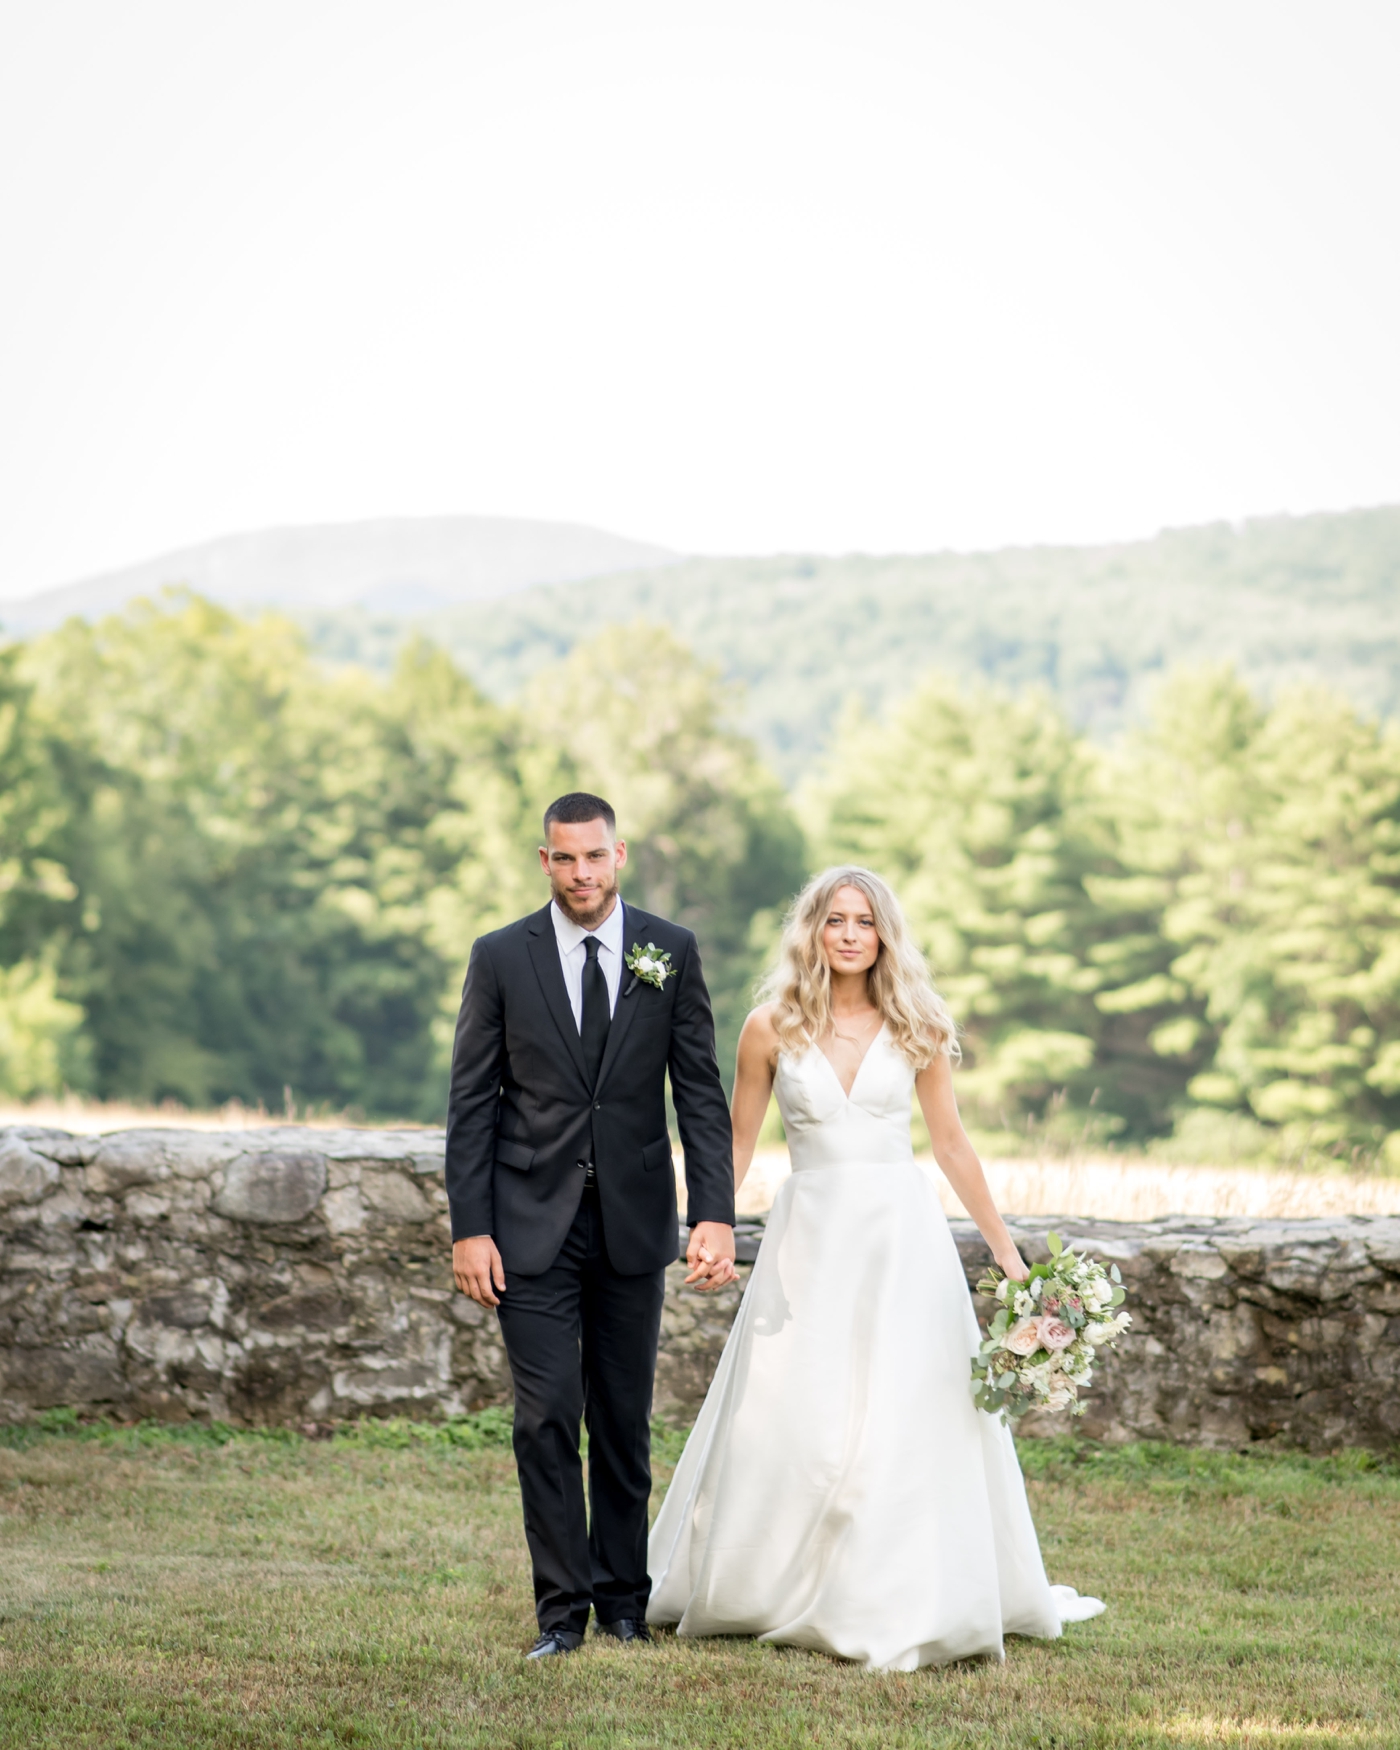 Intimate wedding reception at North Mowing Estate in Vermont